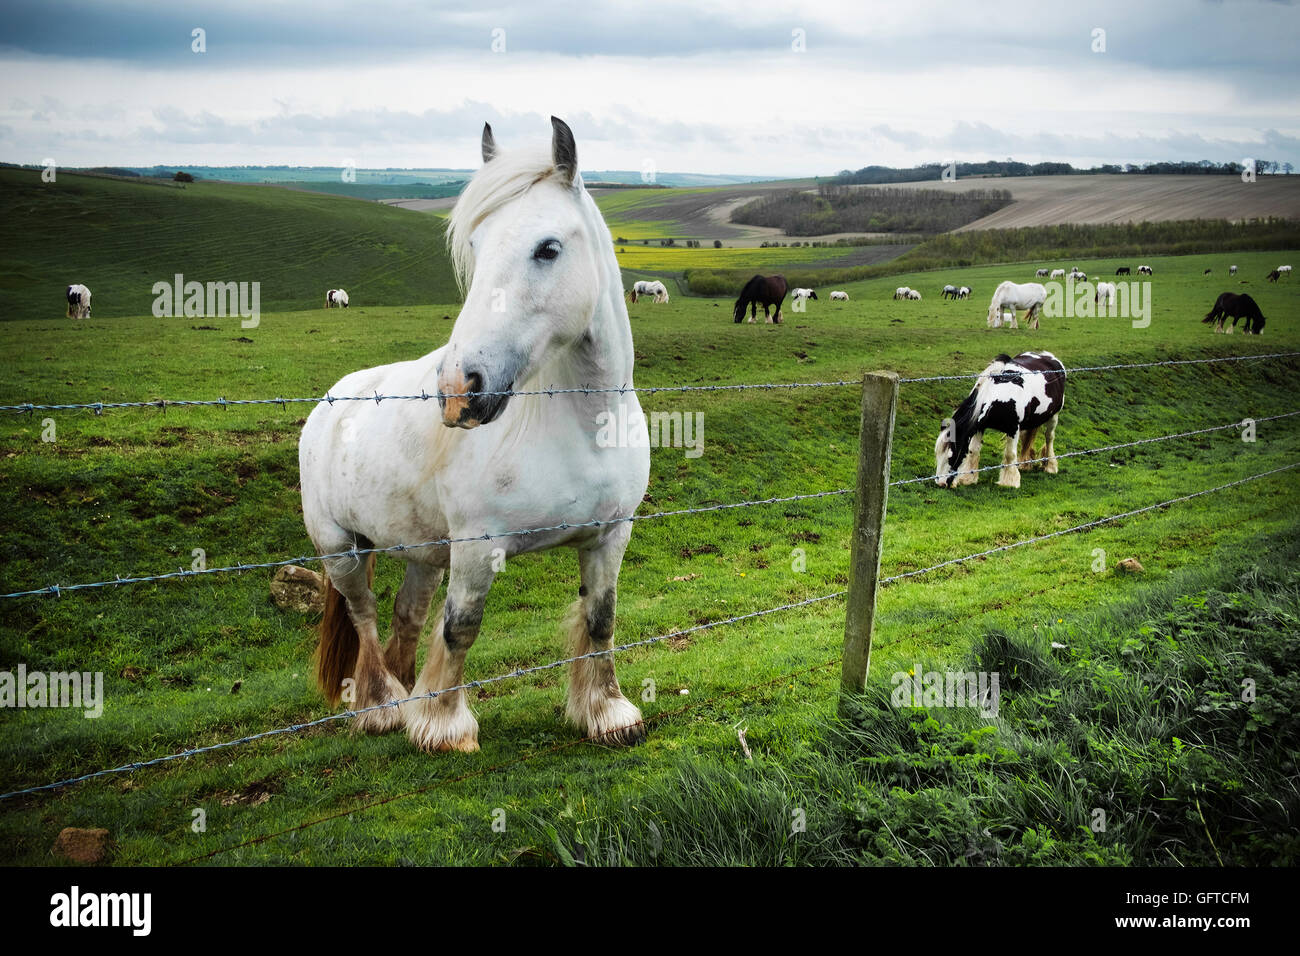 A group of horses grazing on the grass on the open chalk downlands Stock Photo